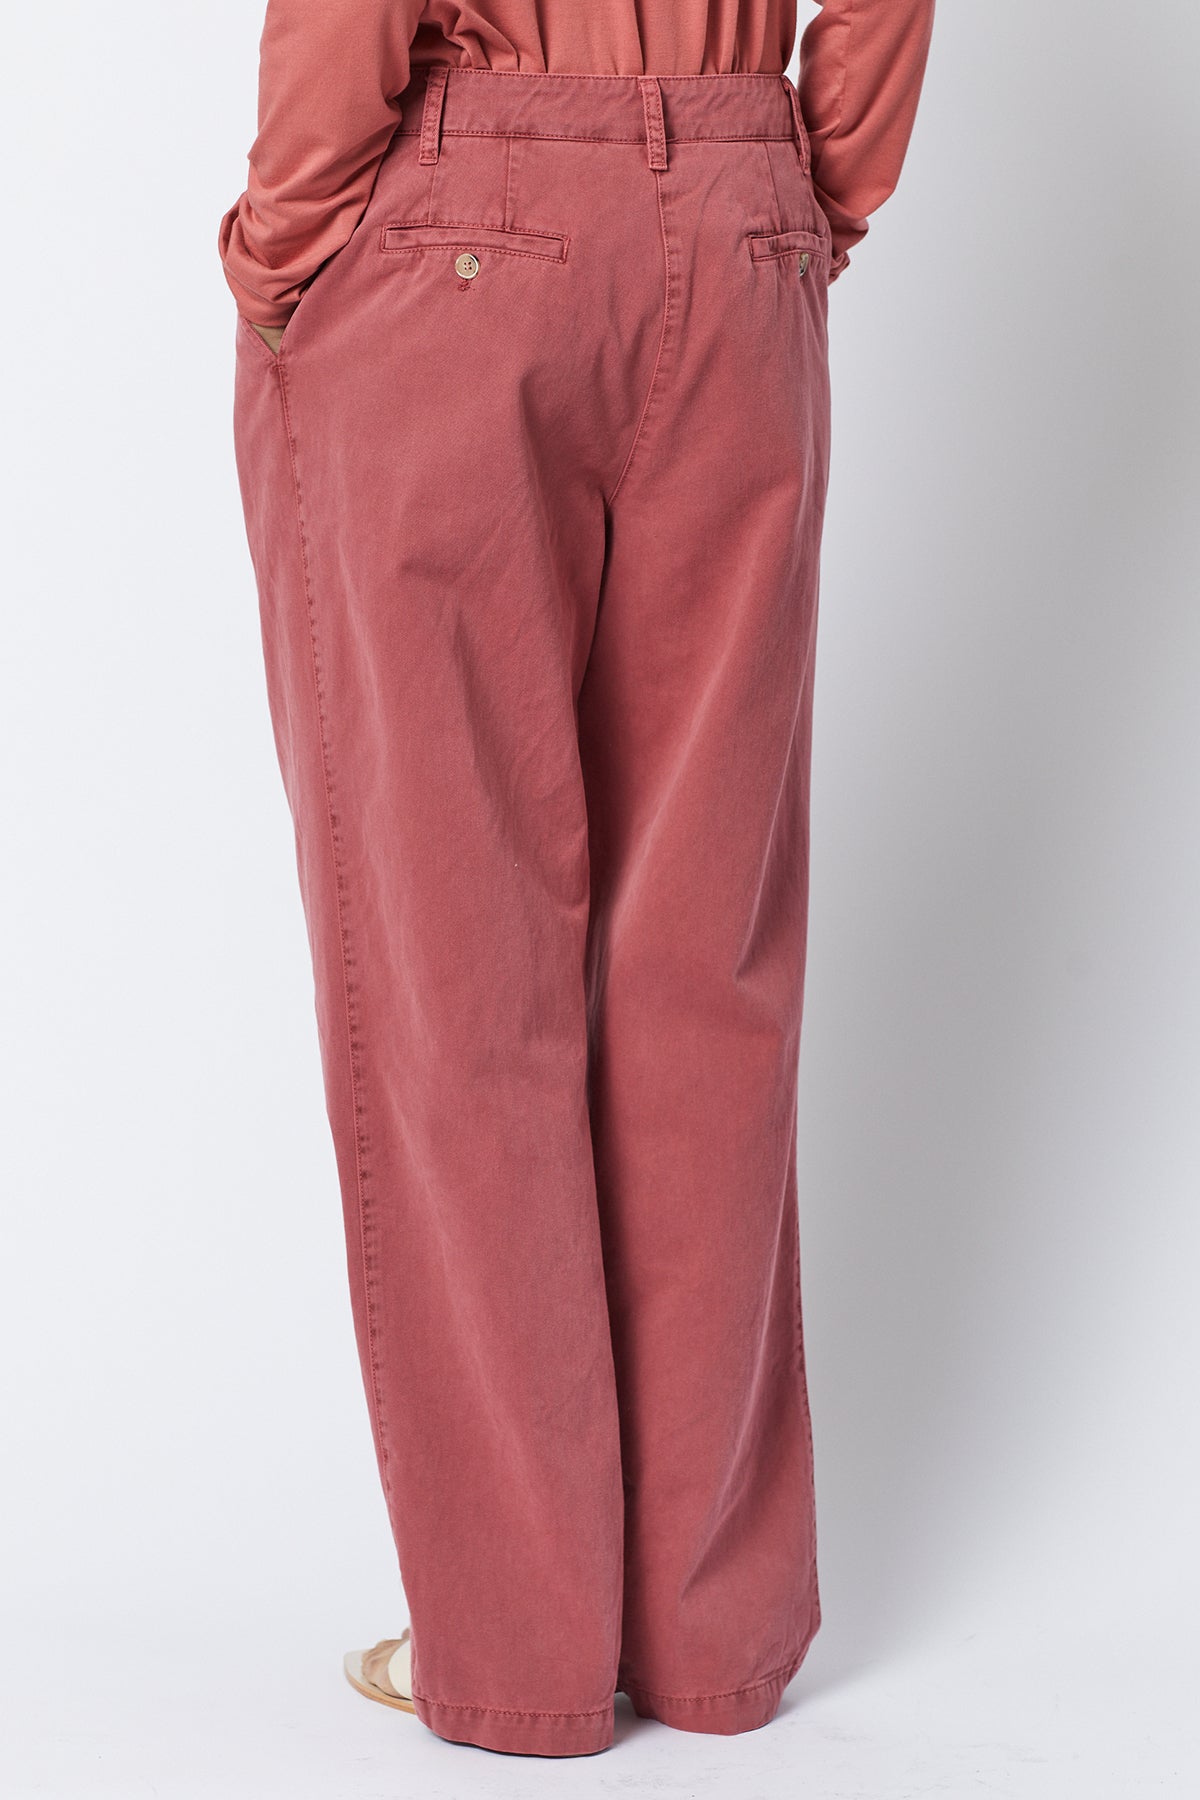   Temescal Pant in femme back 